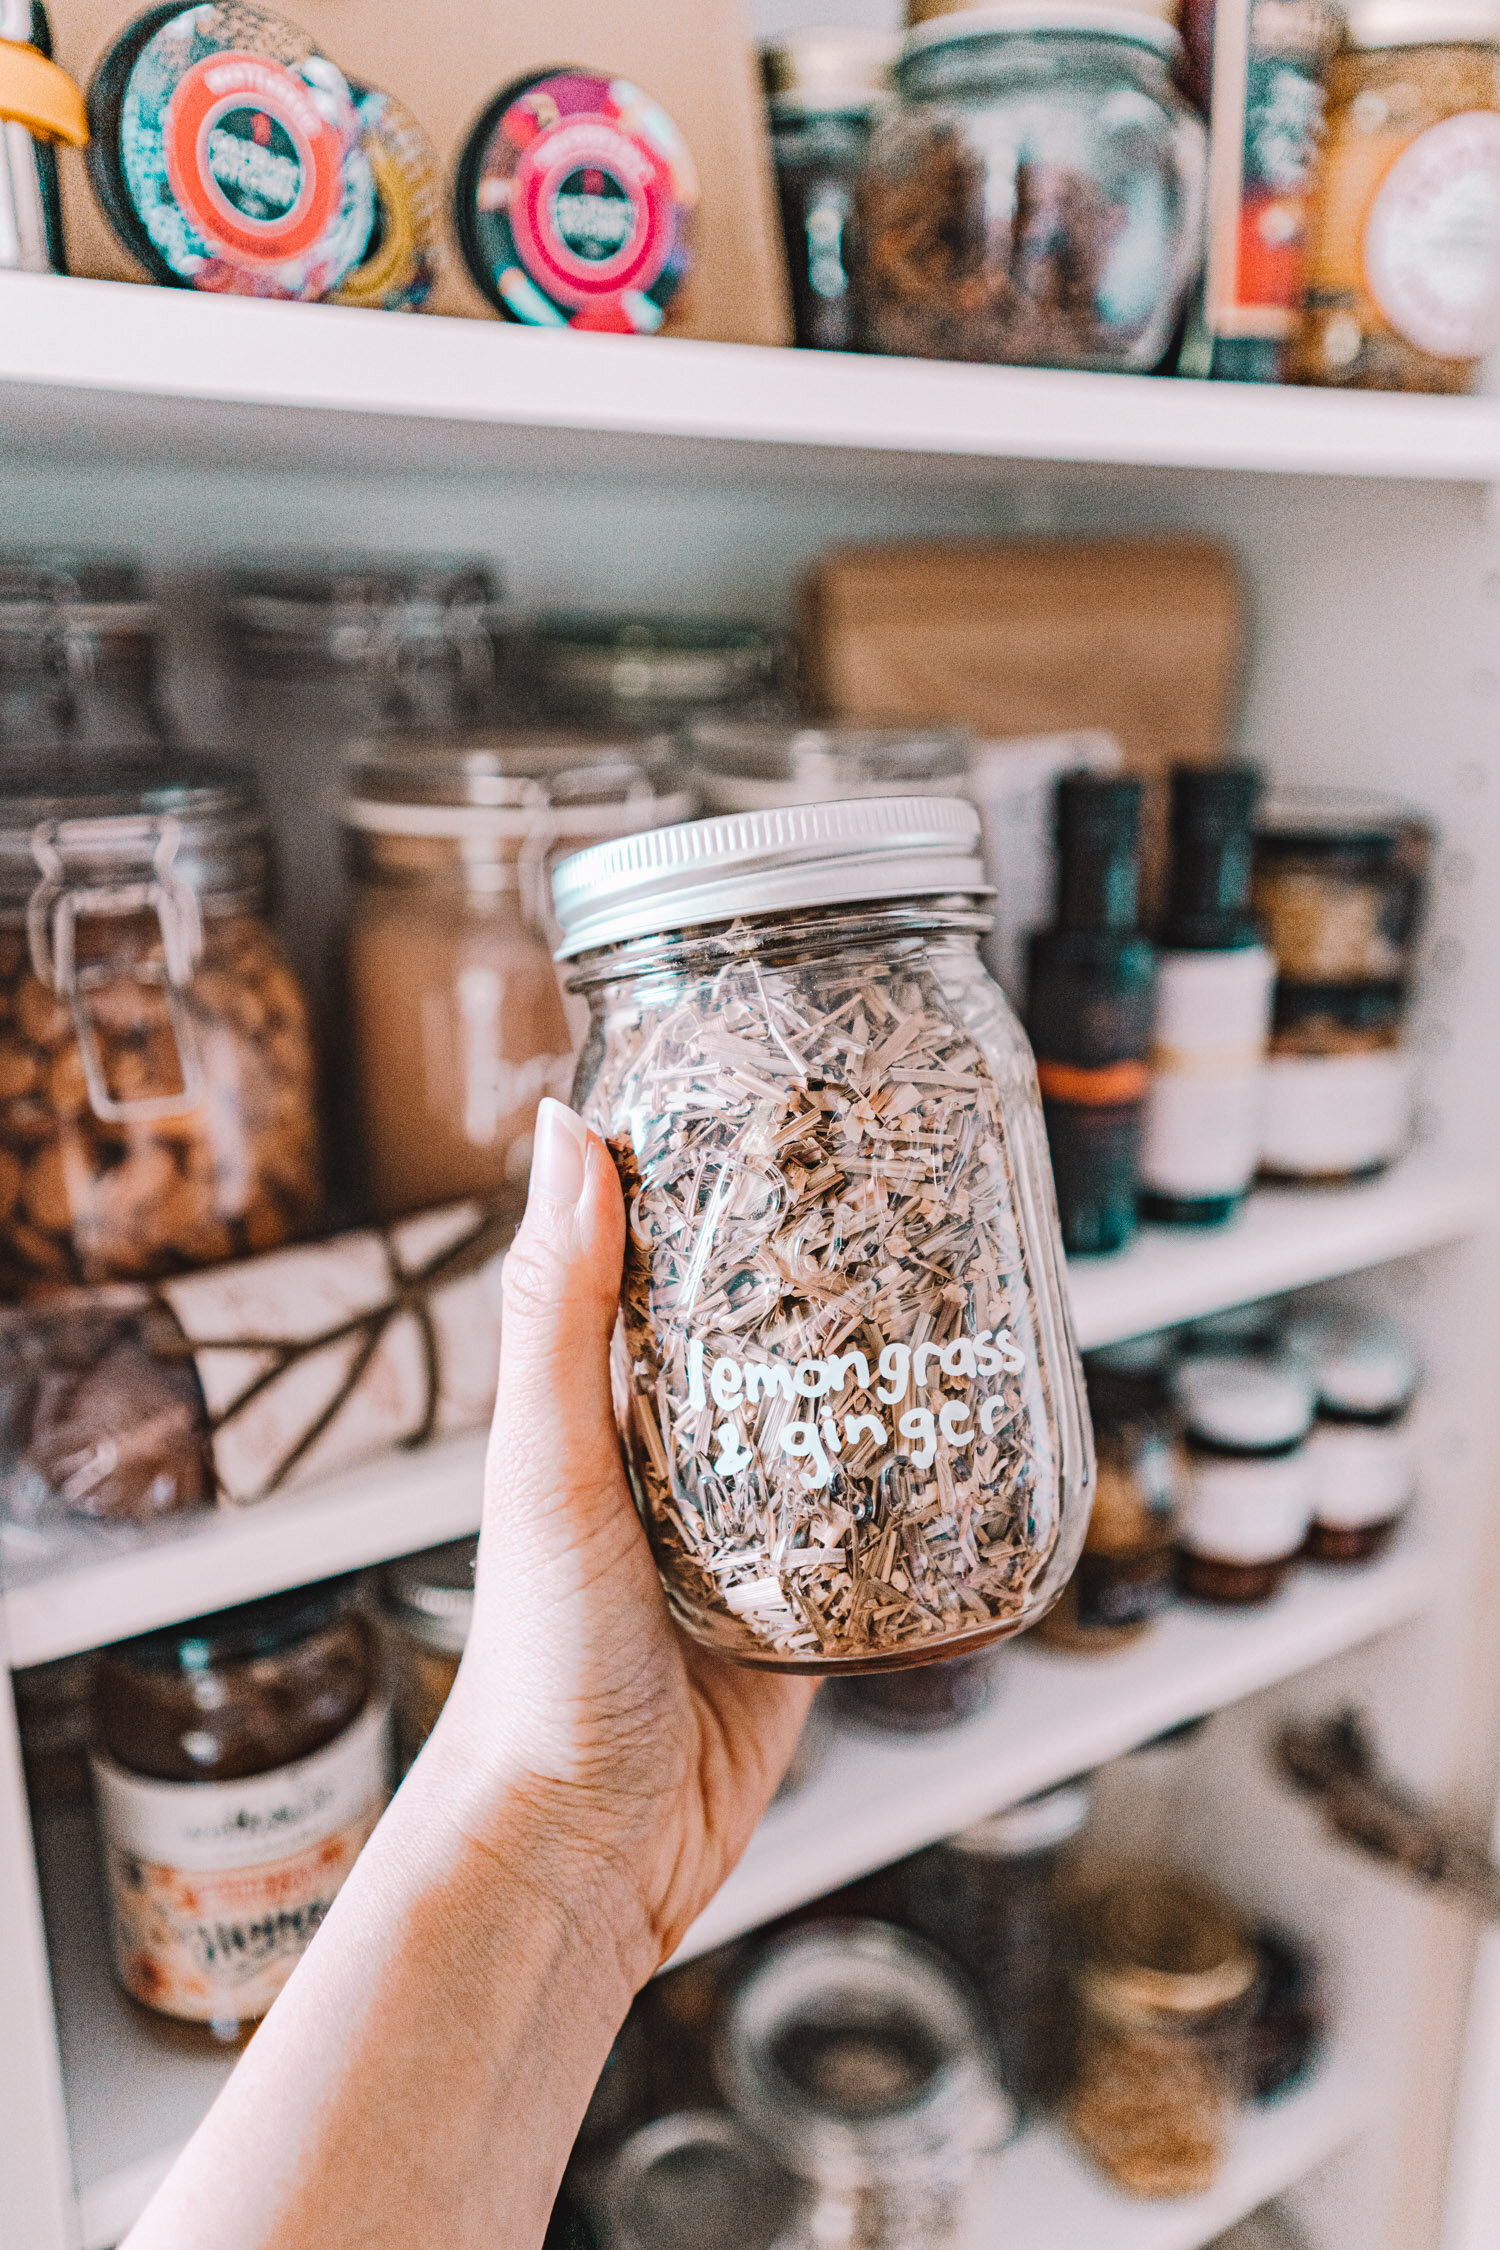 How to Organize Your Pantry with Mason Jars